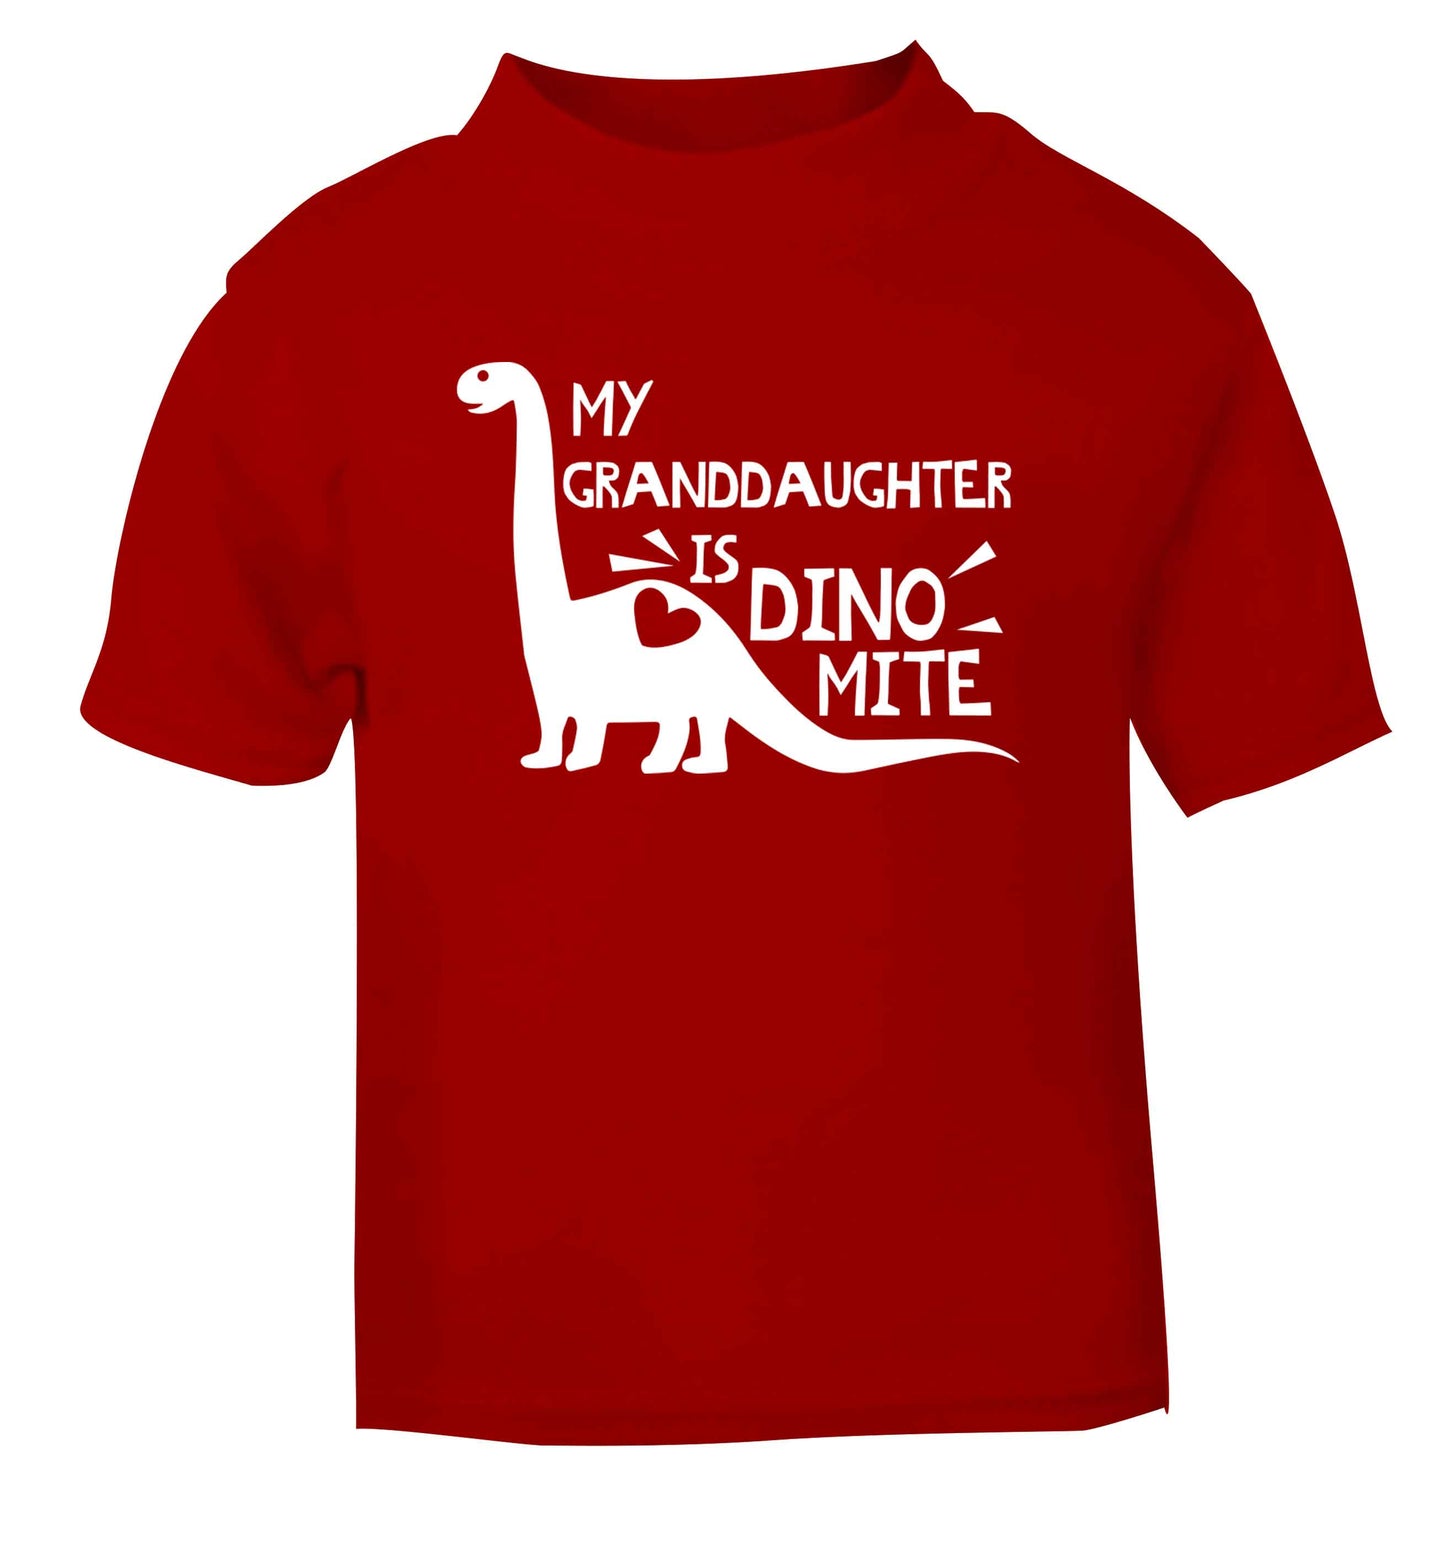 My granddaughter is dinomite! red Baby Toddler Tshirt 2 Years